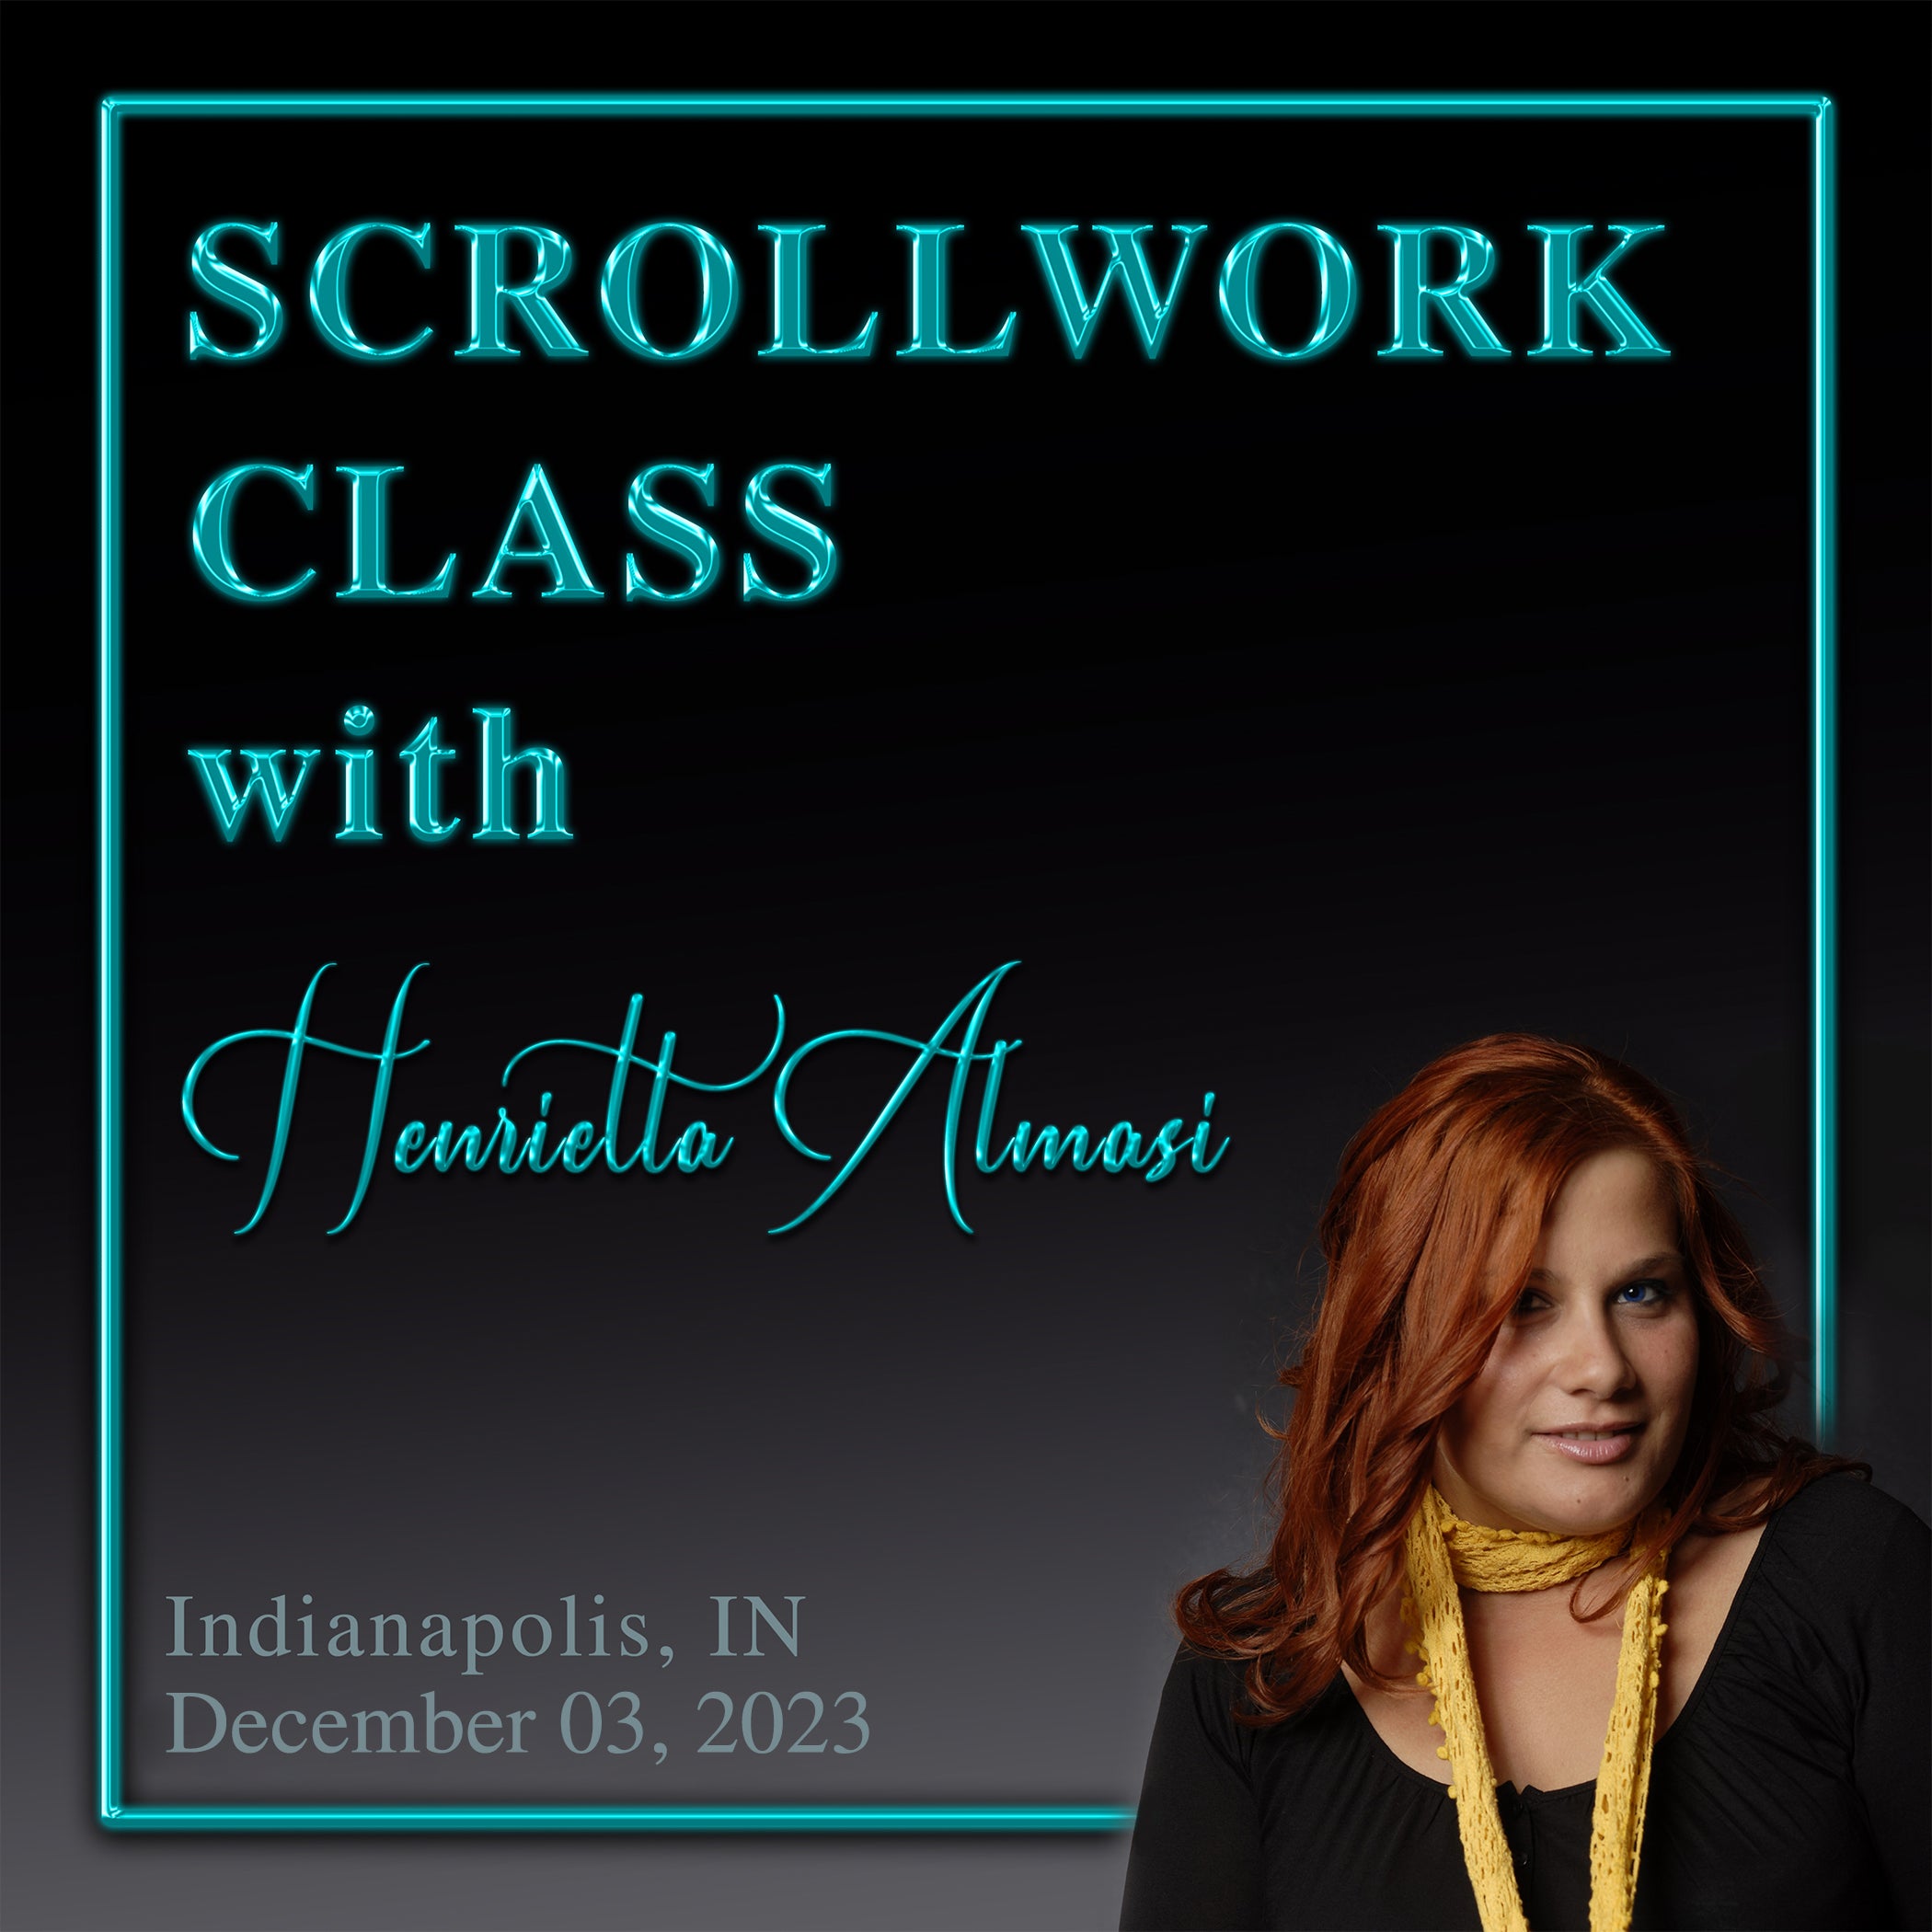 Scrollwork Class ~ Indianapolis, Indiana ~ December 3, 2023